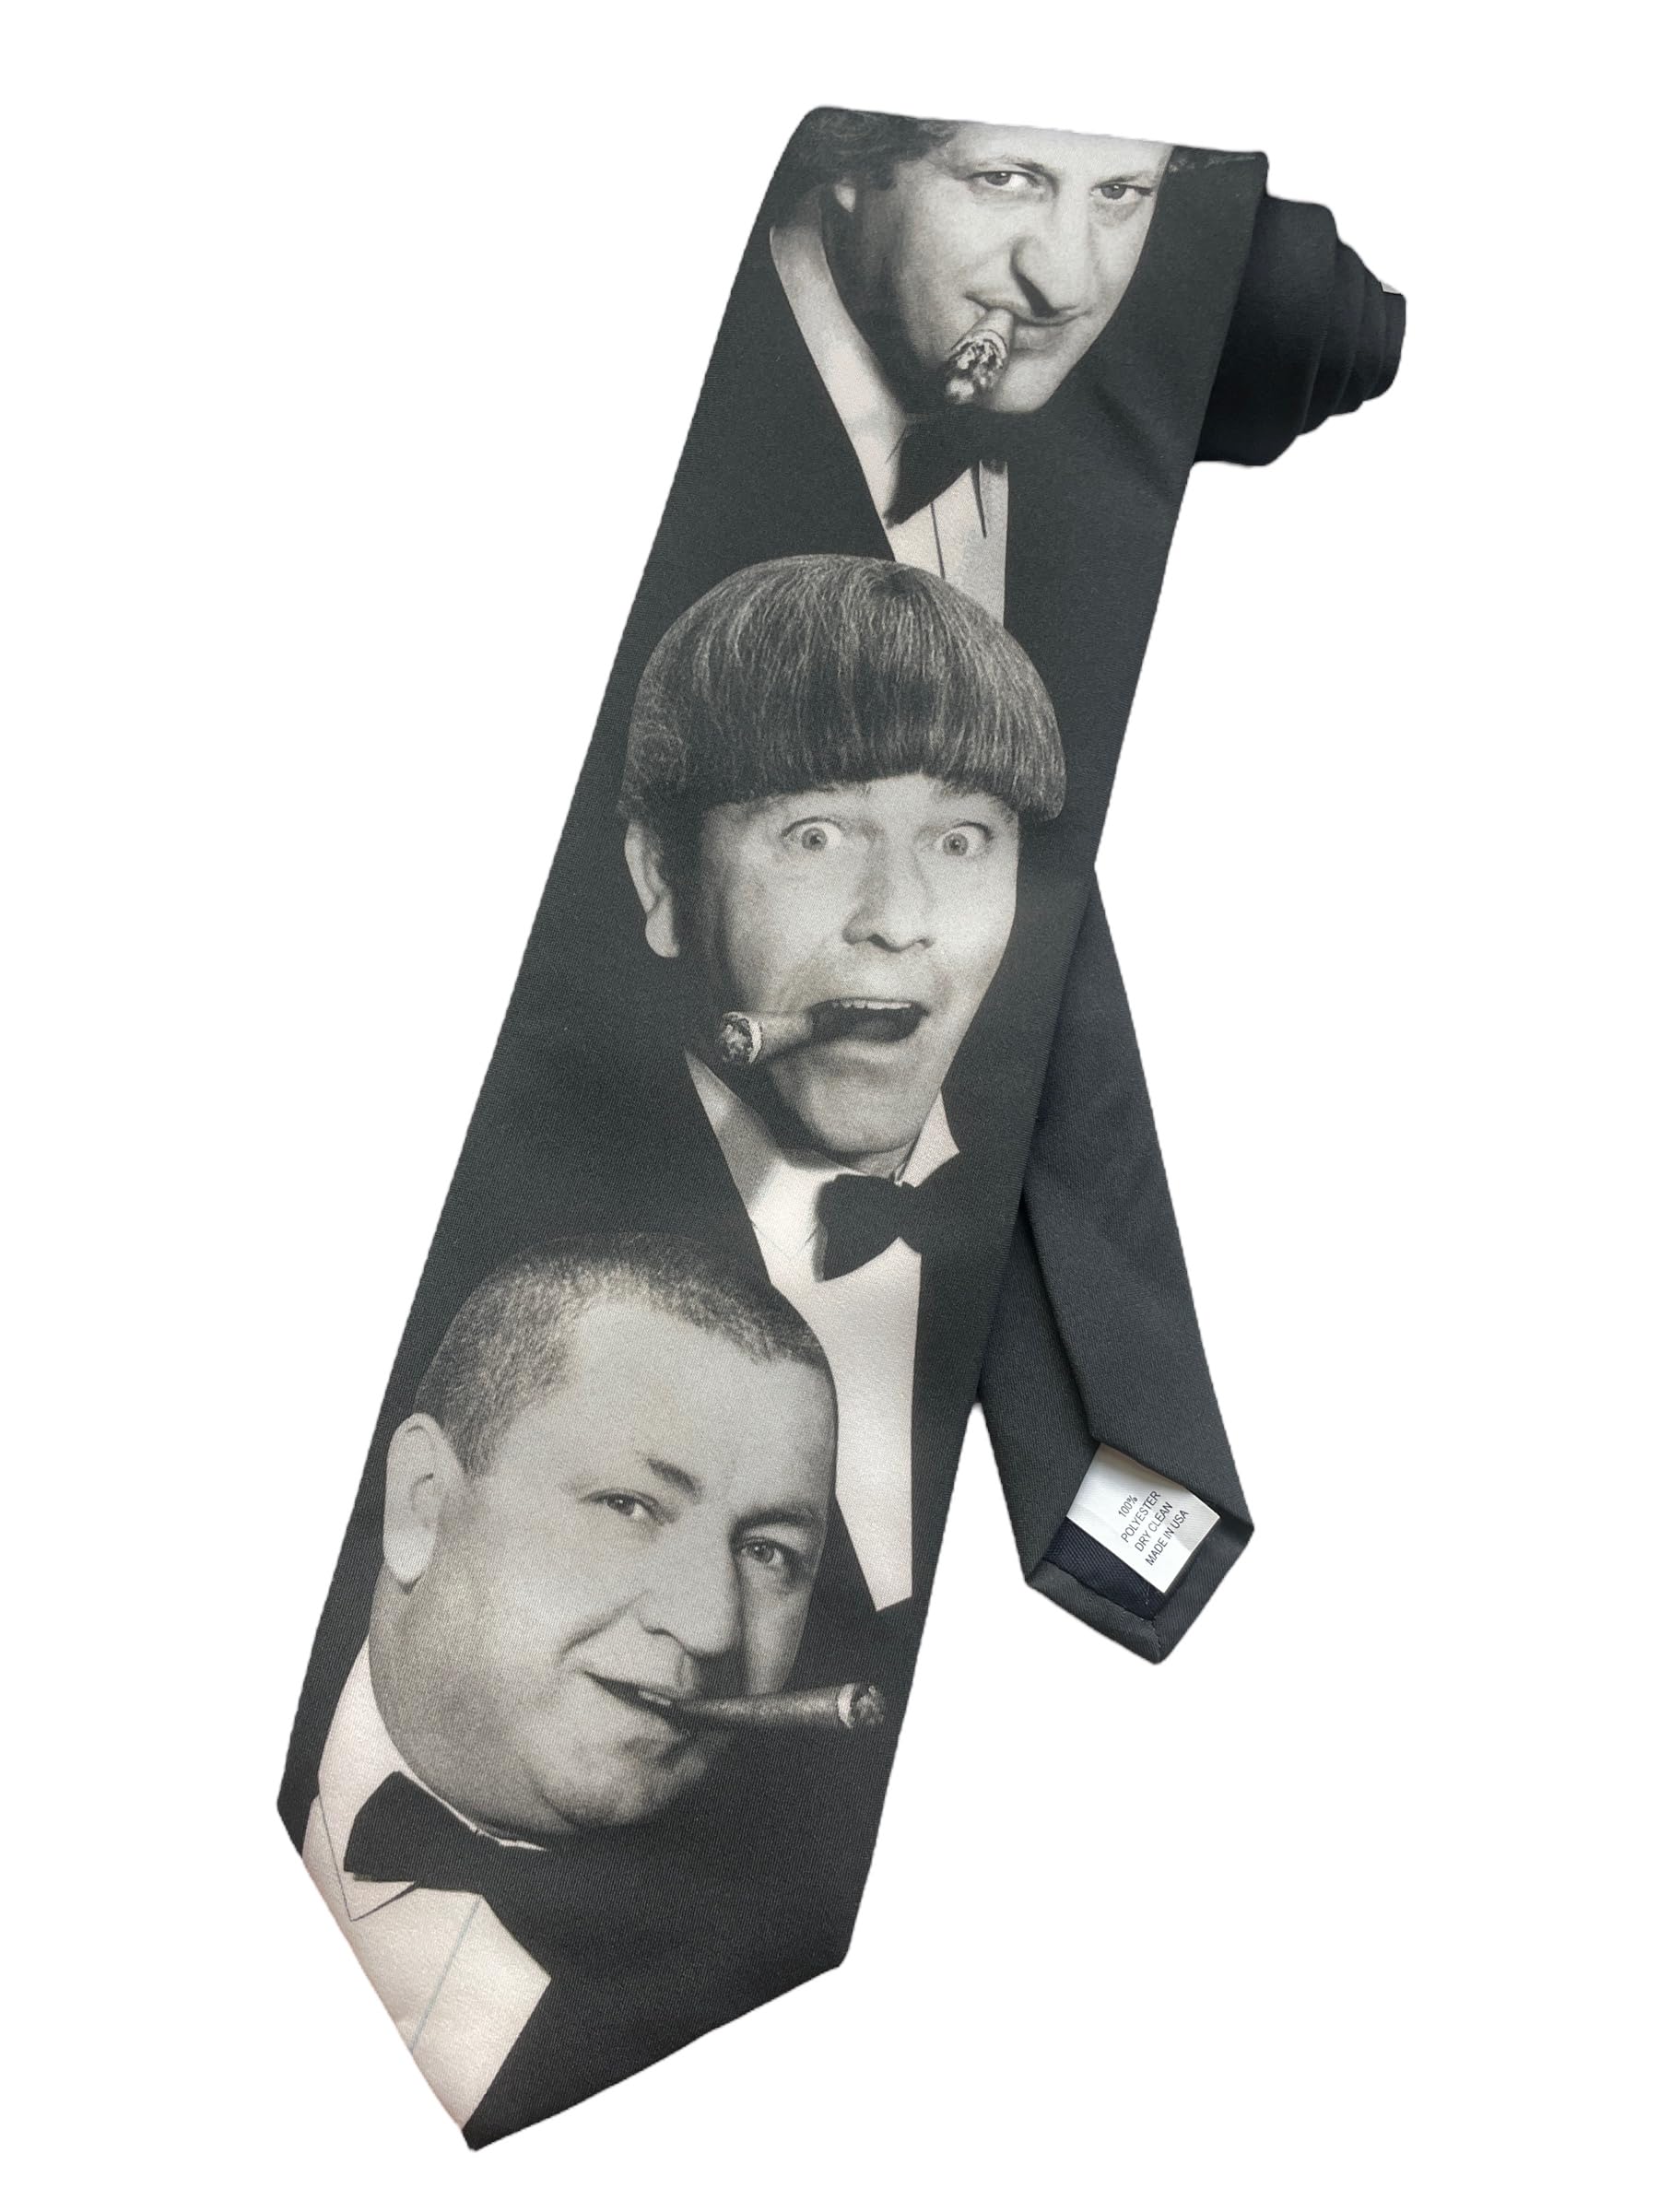 Necktie of the Three Stooges smoking cigars - Moe, Larry, Curly